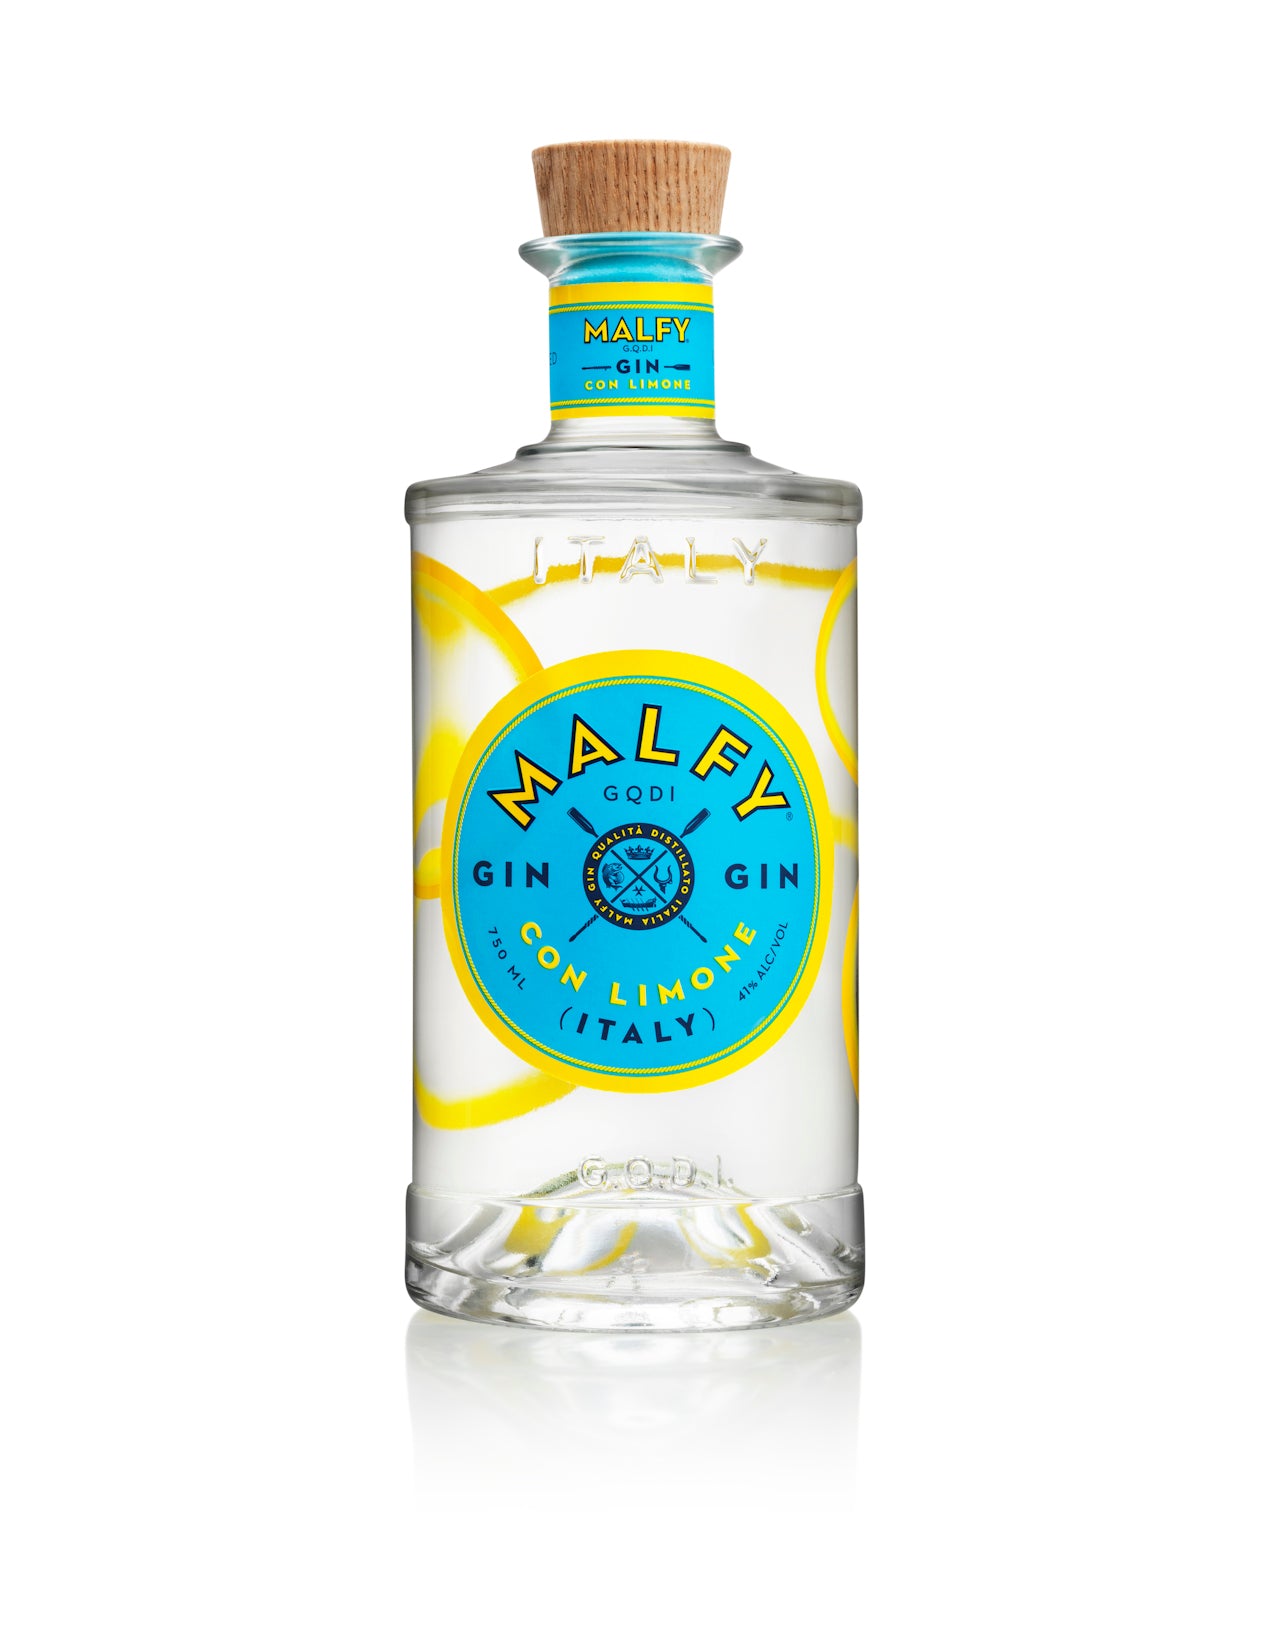 BUY] Malfy Gin Con Limone (RECOMMENDED) at